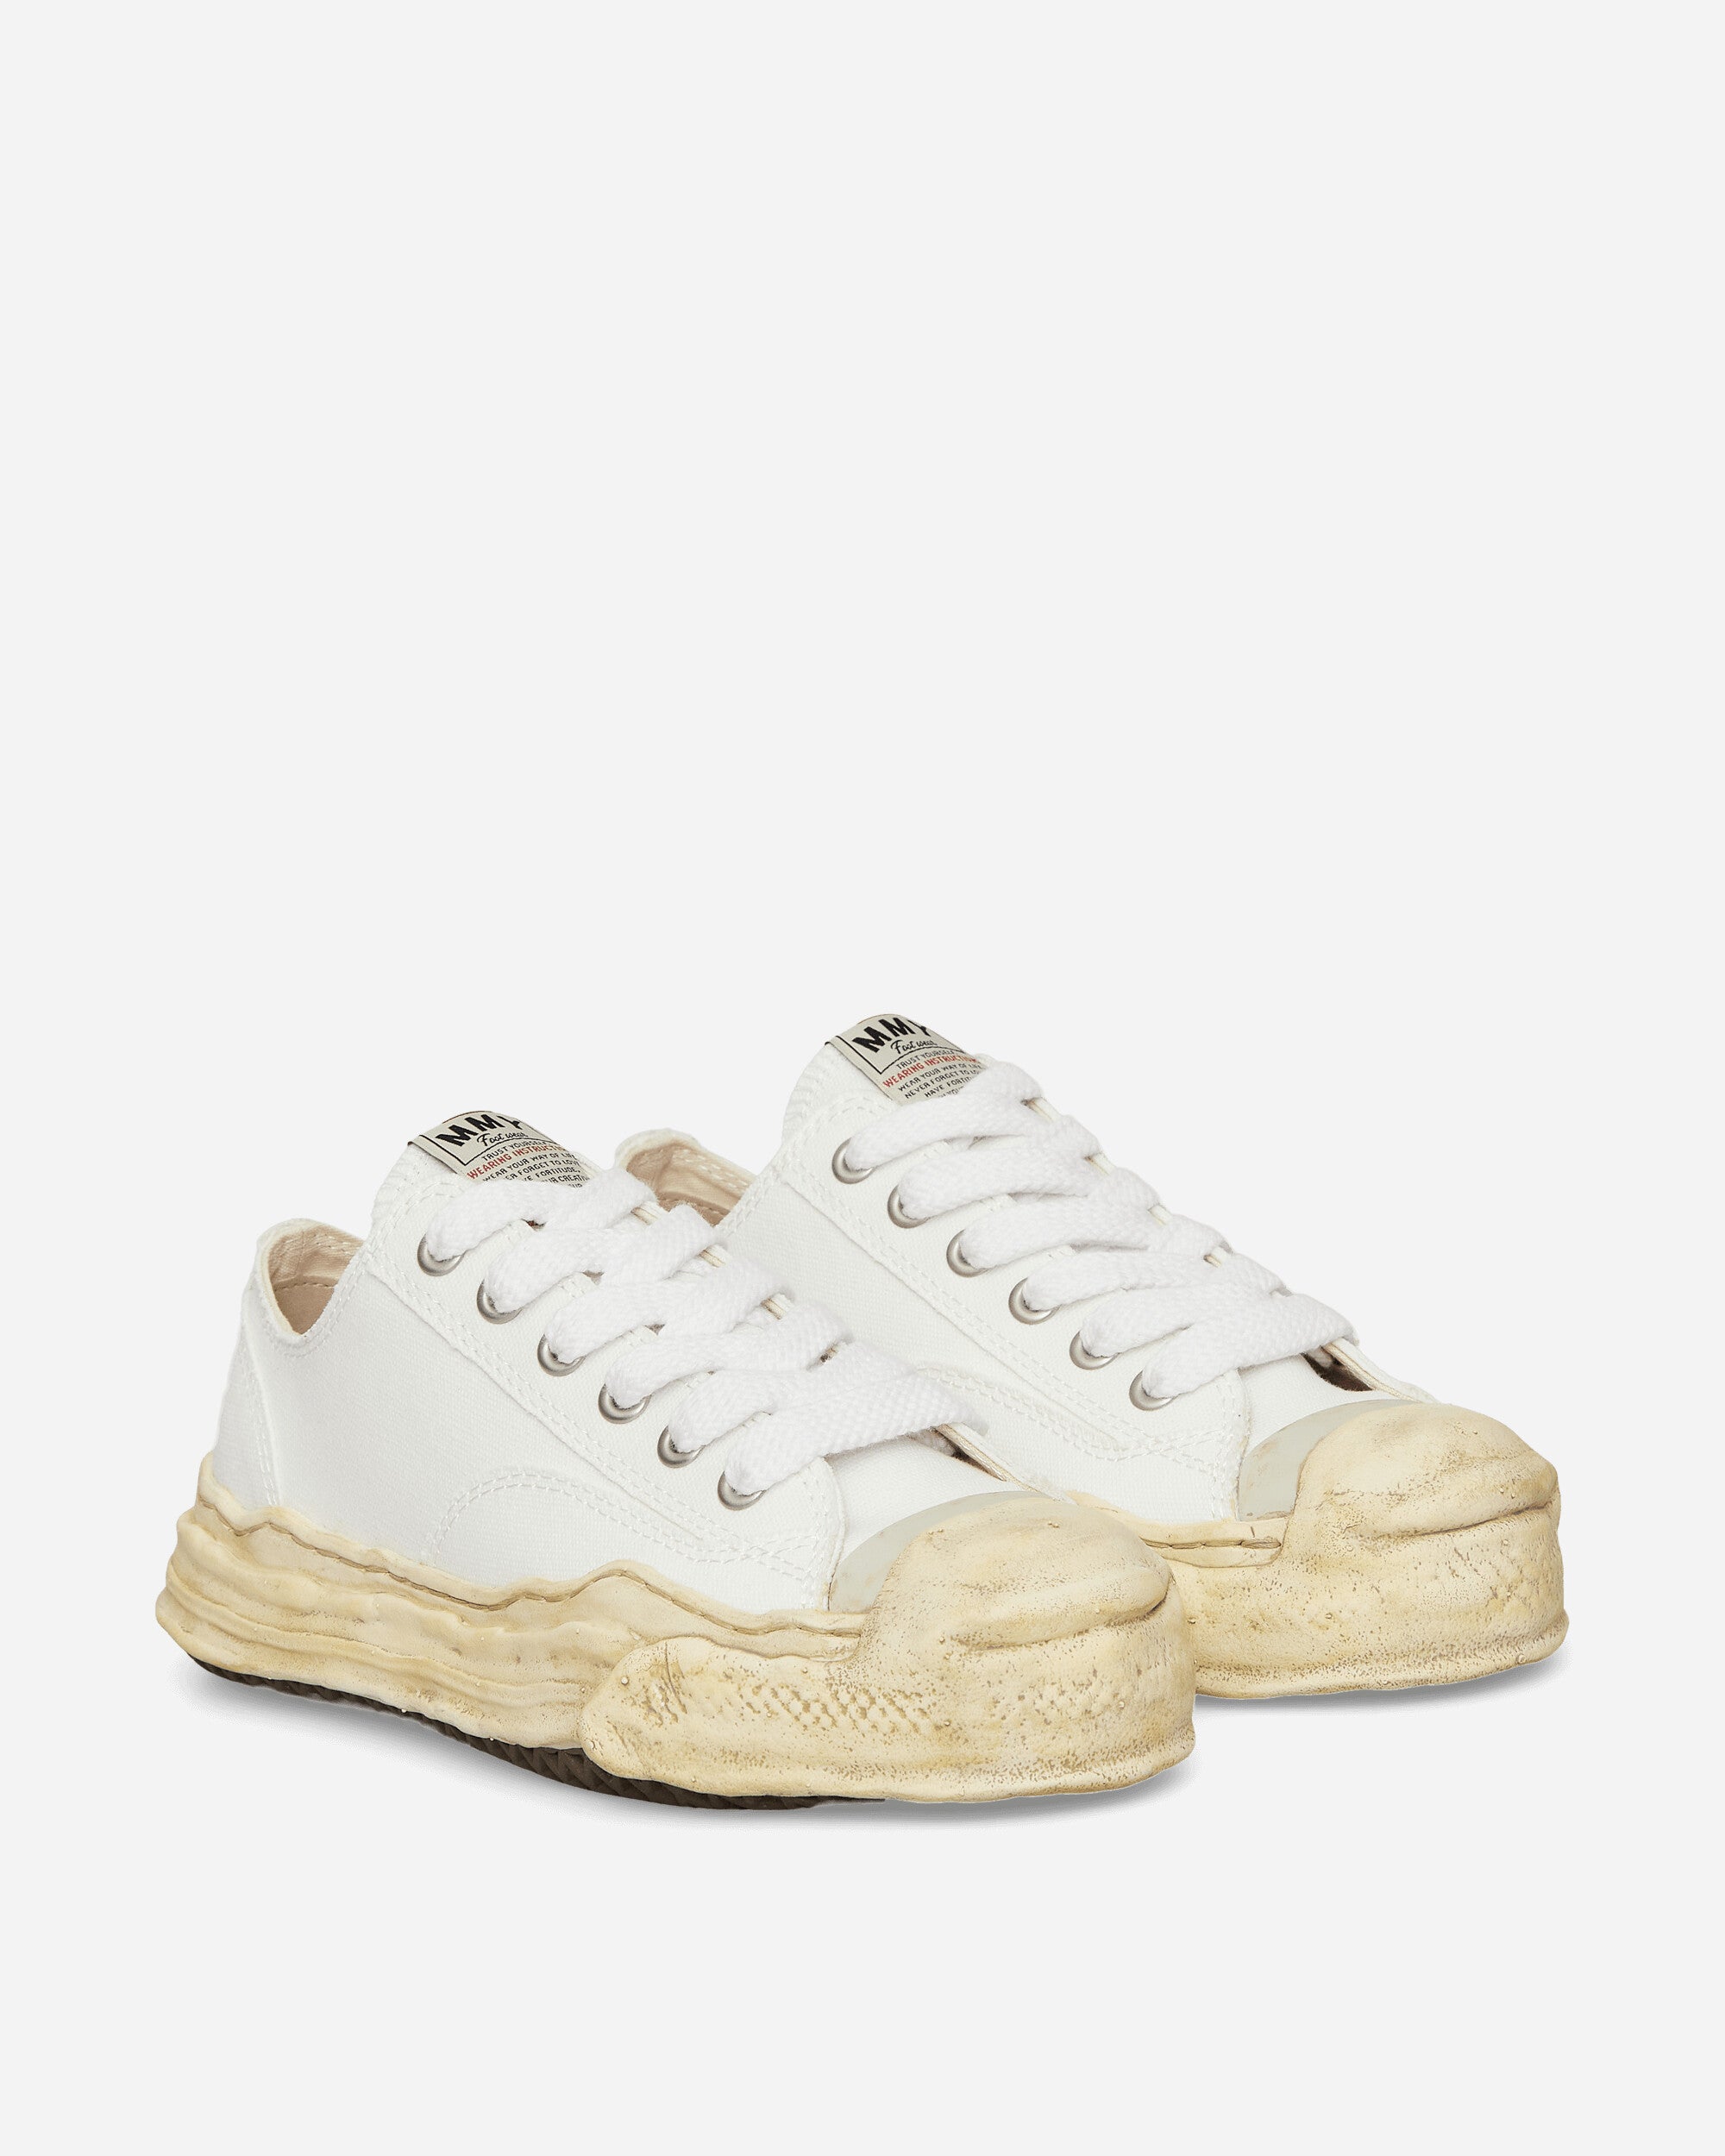 Maison MIHARA YASUHIRO Hank / Original Sole Garment Dyed Canvas Low-Top White Sneakers Low A13FW733 WHITE